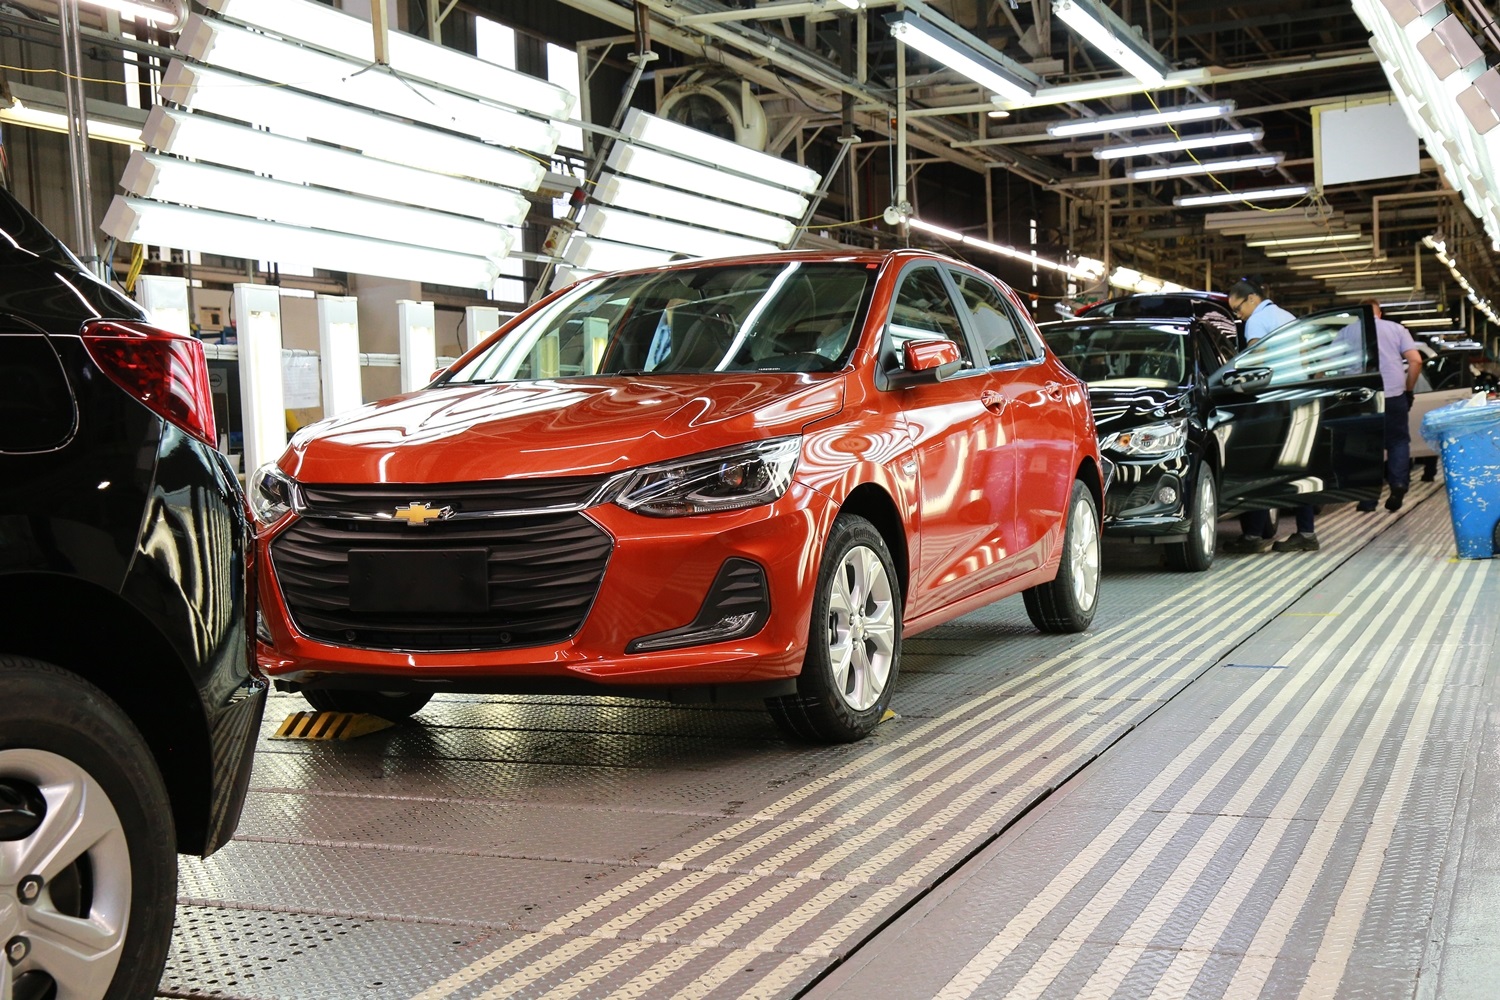 Chevy Onix Production To Be Temporarily Suspended In Brazil